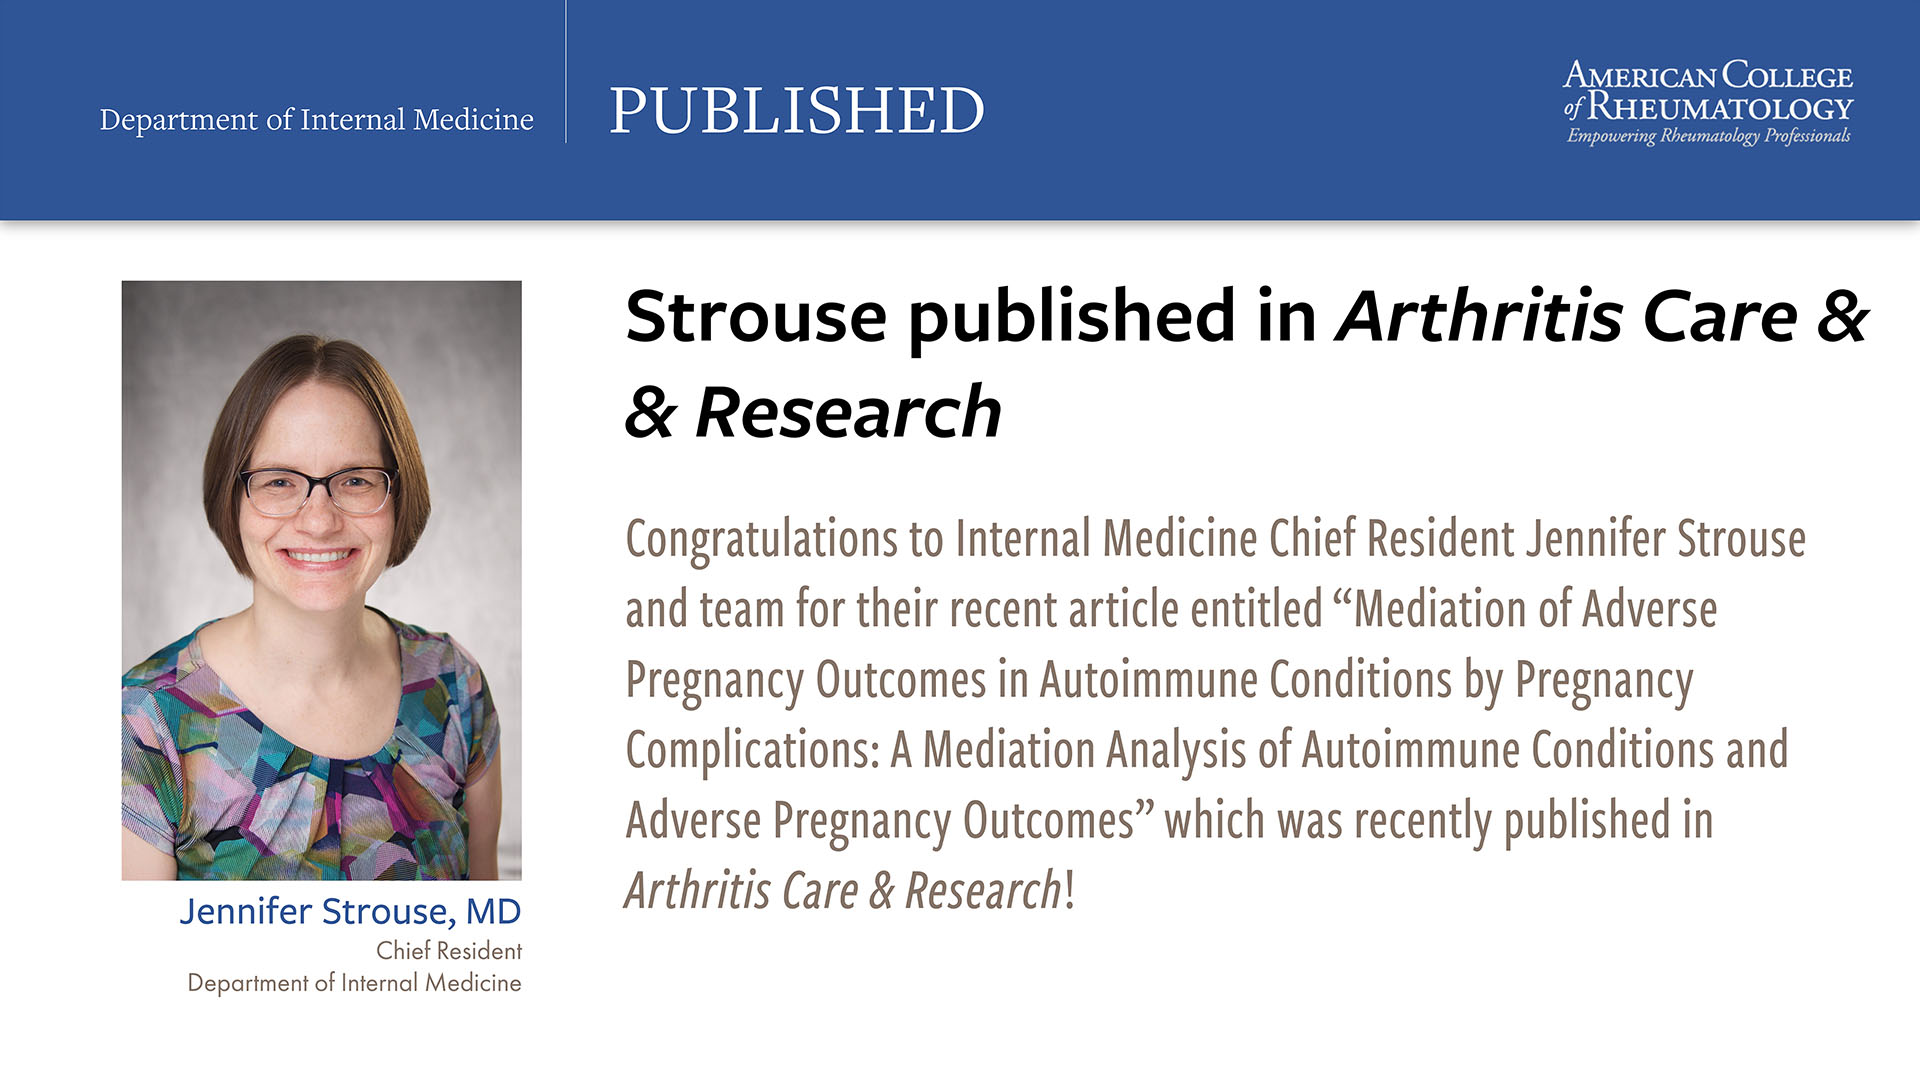 published - strouse